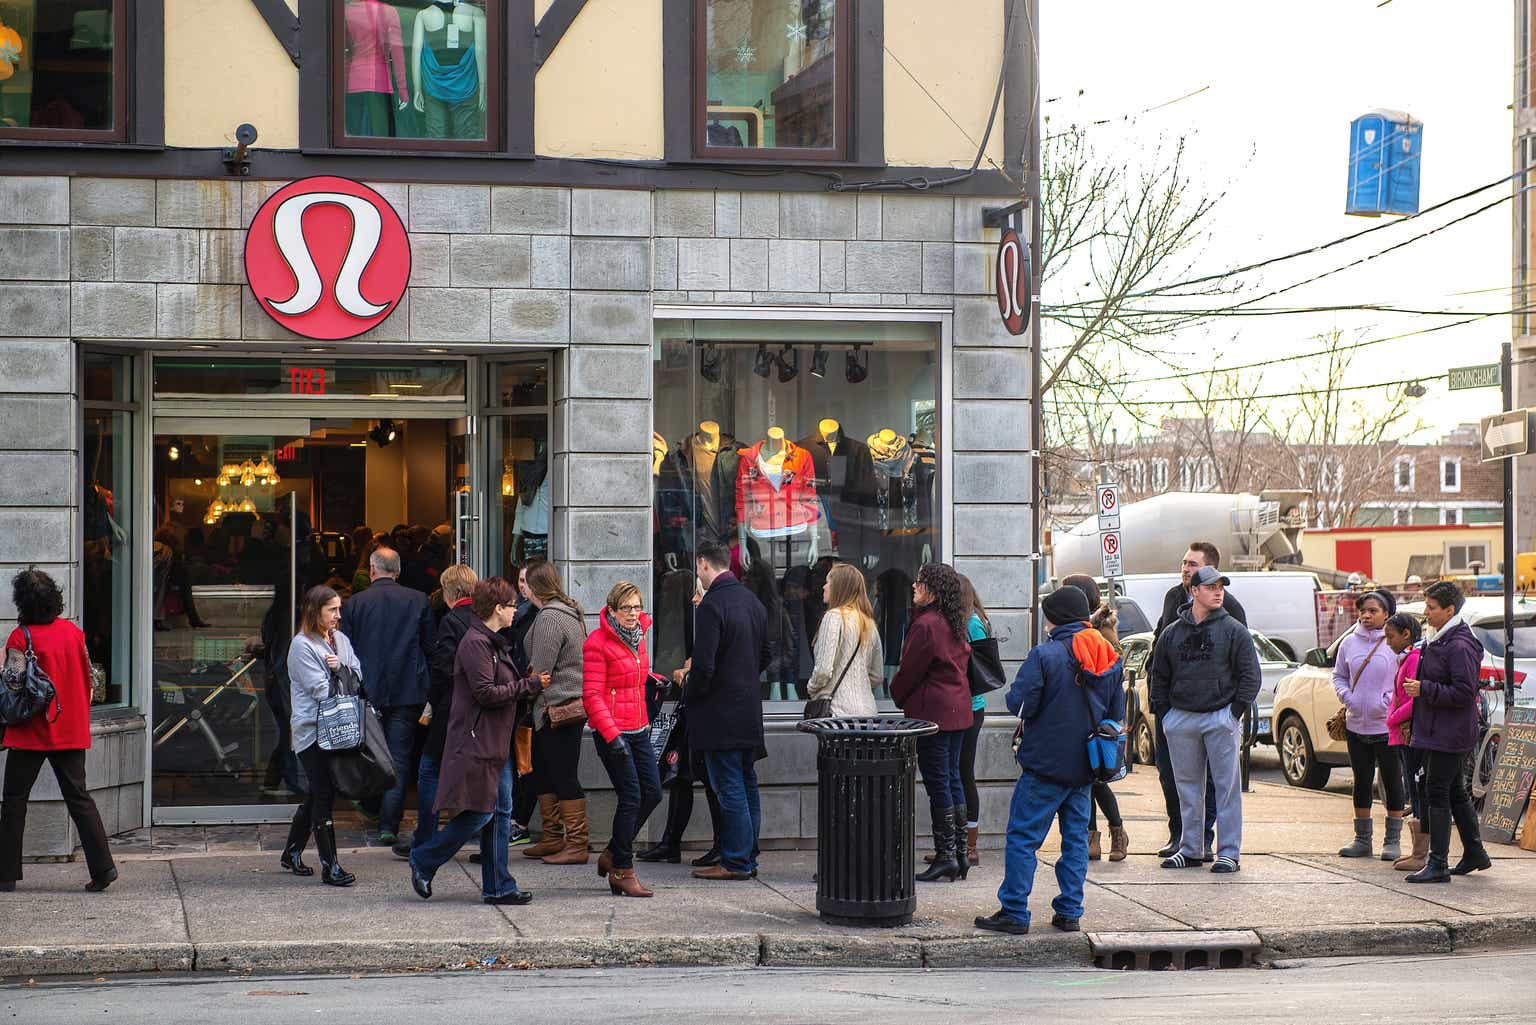 Lululemon Stock: Set To Complete Five-Year Goals But Risks Remain